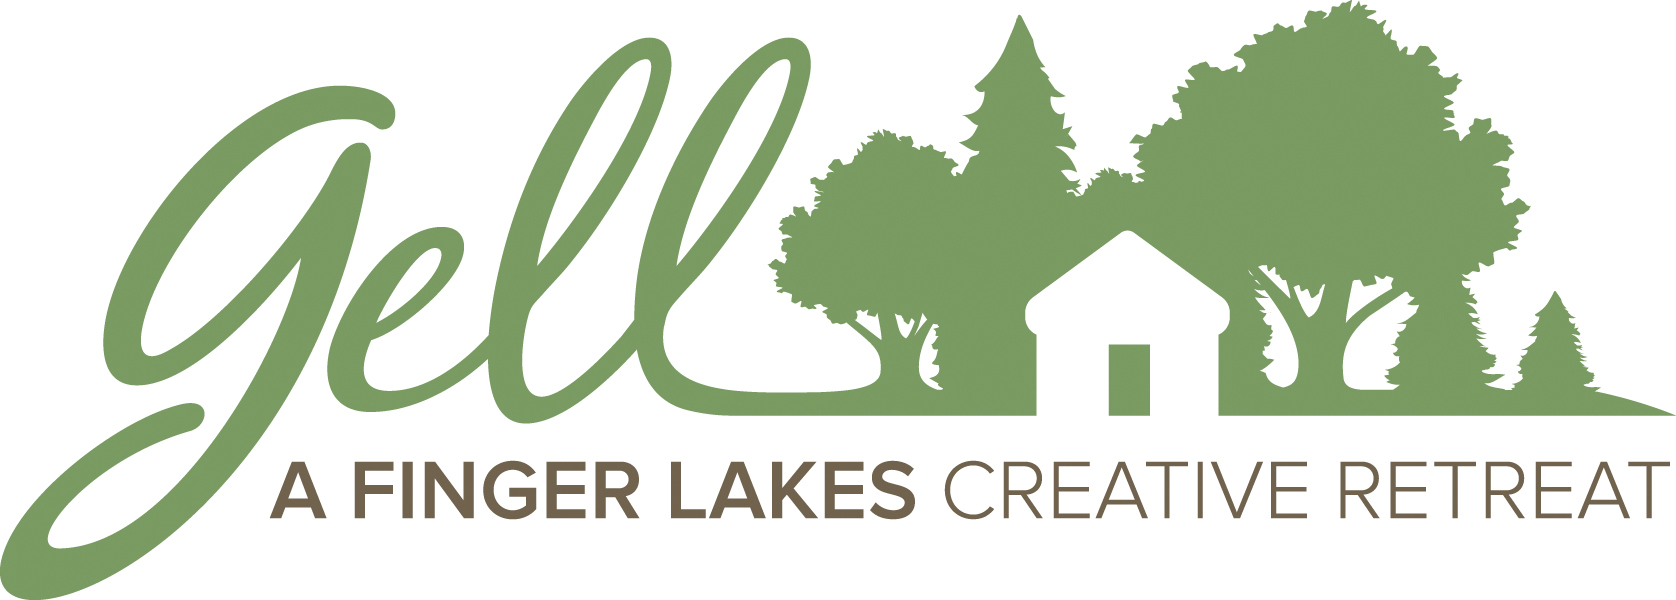 Gell Center of the Finger Lakes Name, Logo and Tagline